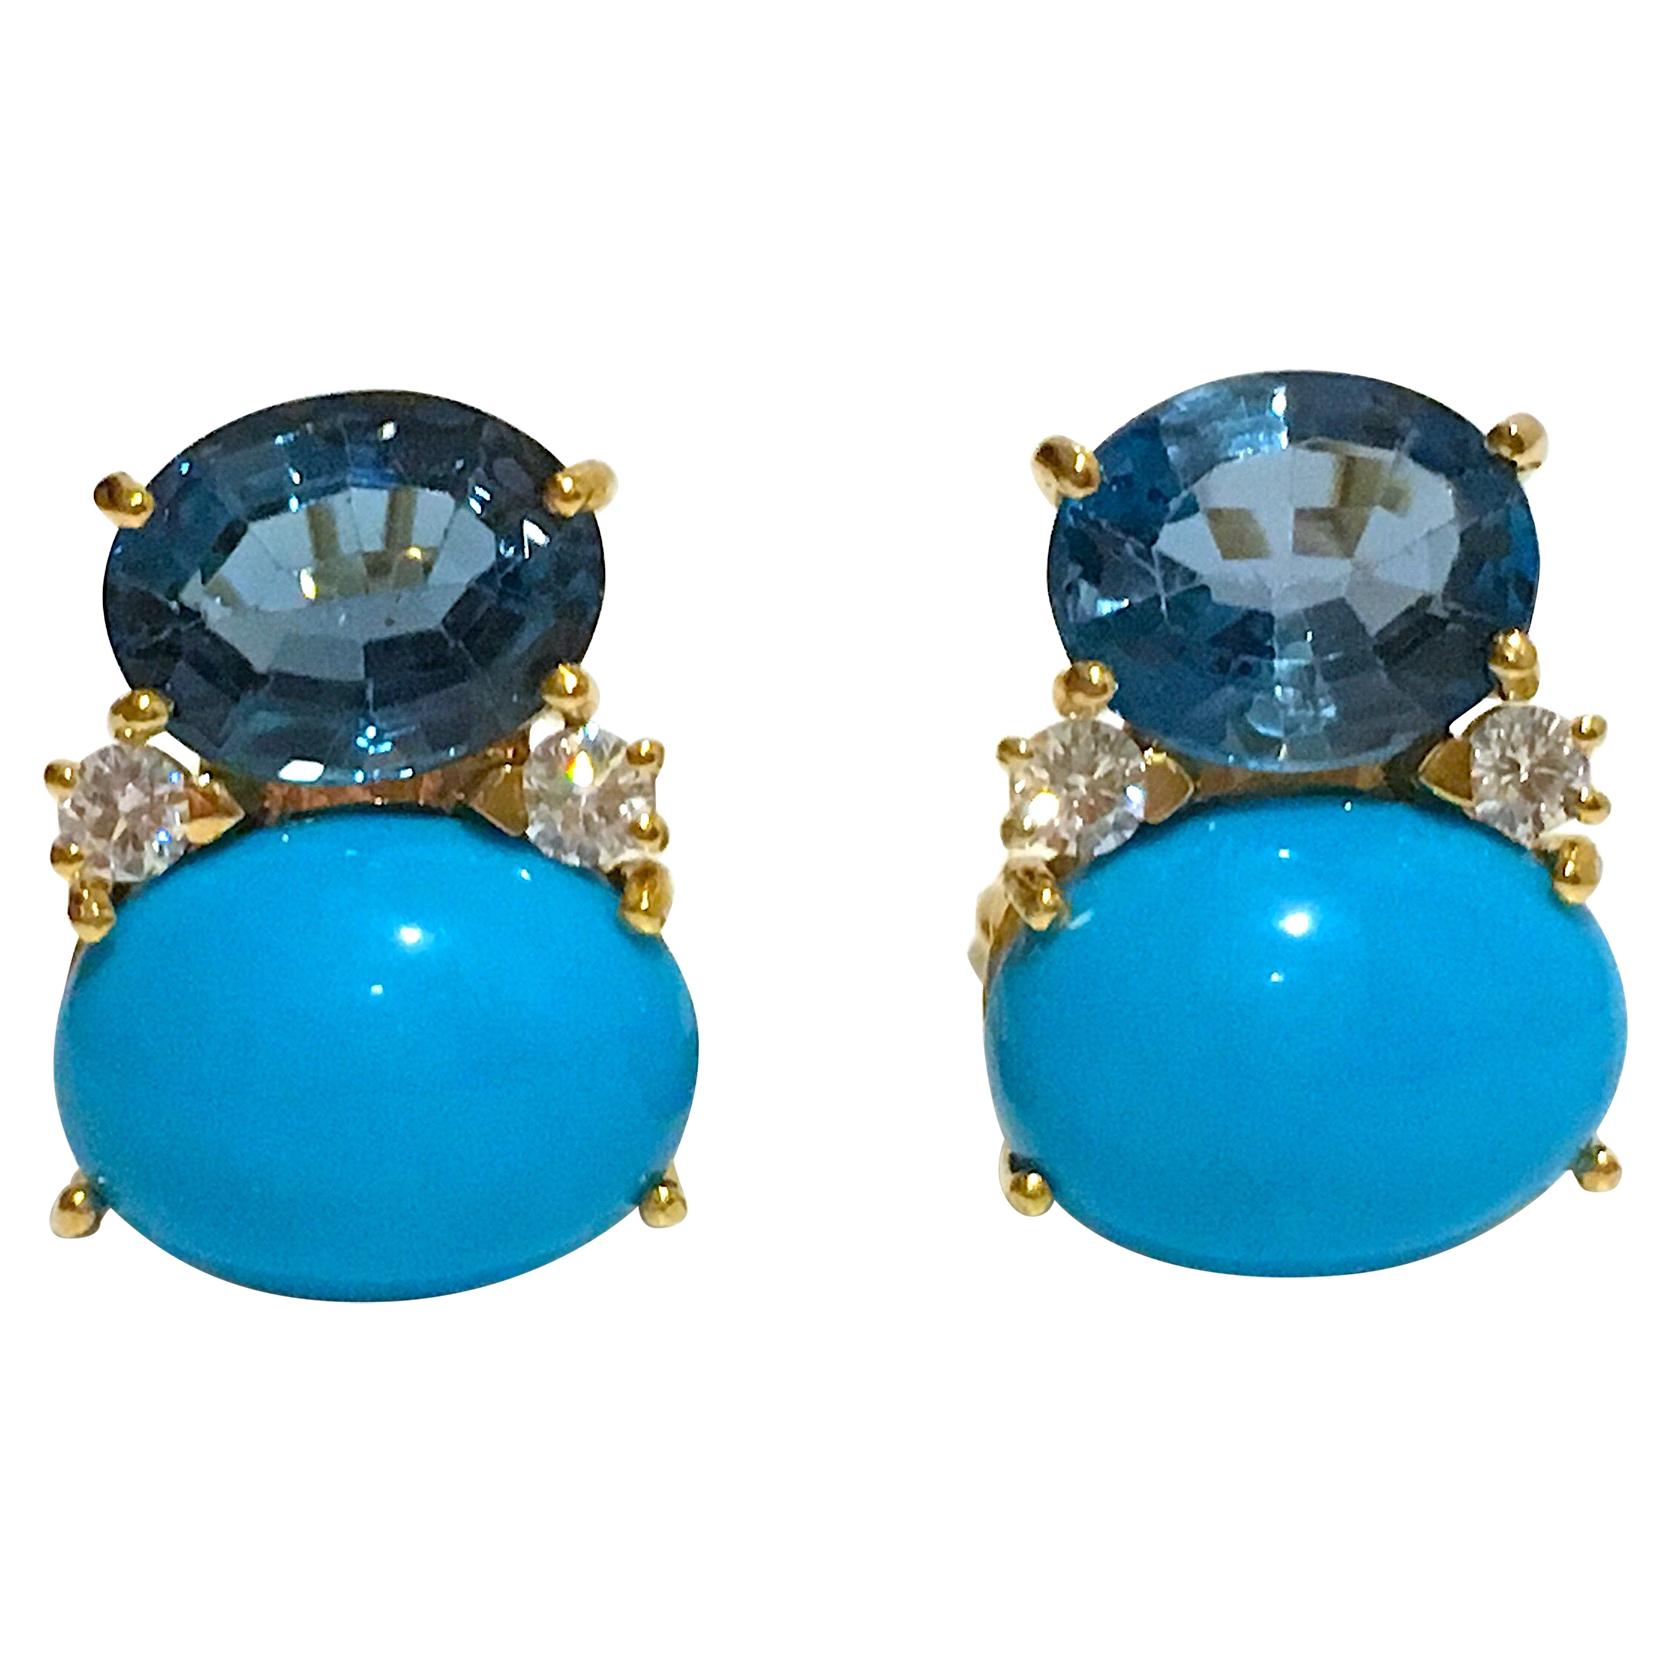 Large Gum Drop Earrings with Iolite, Turquoise and Diamonds Clip or Pierced For Sale 2